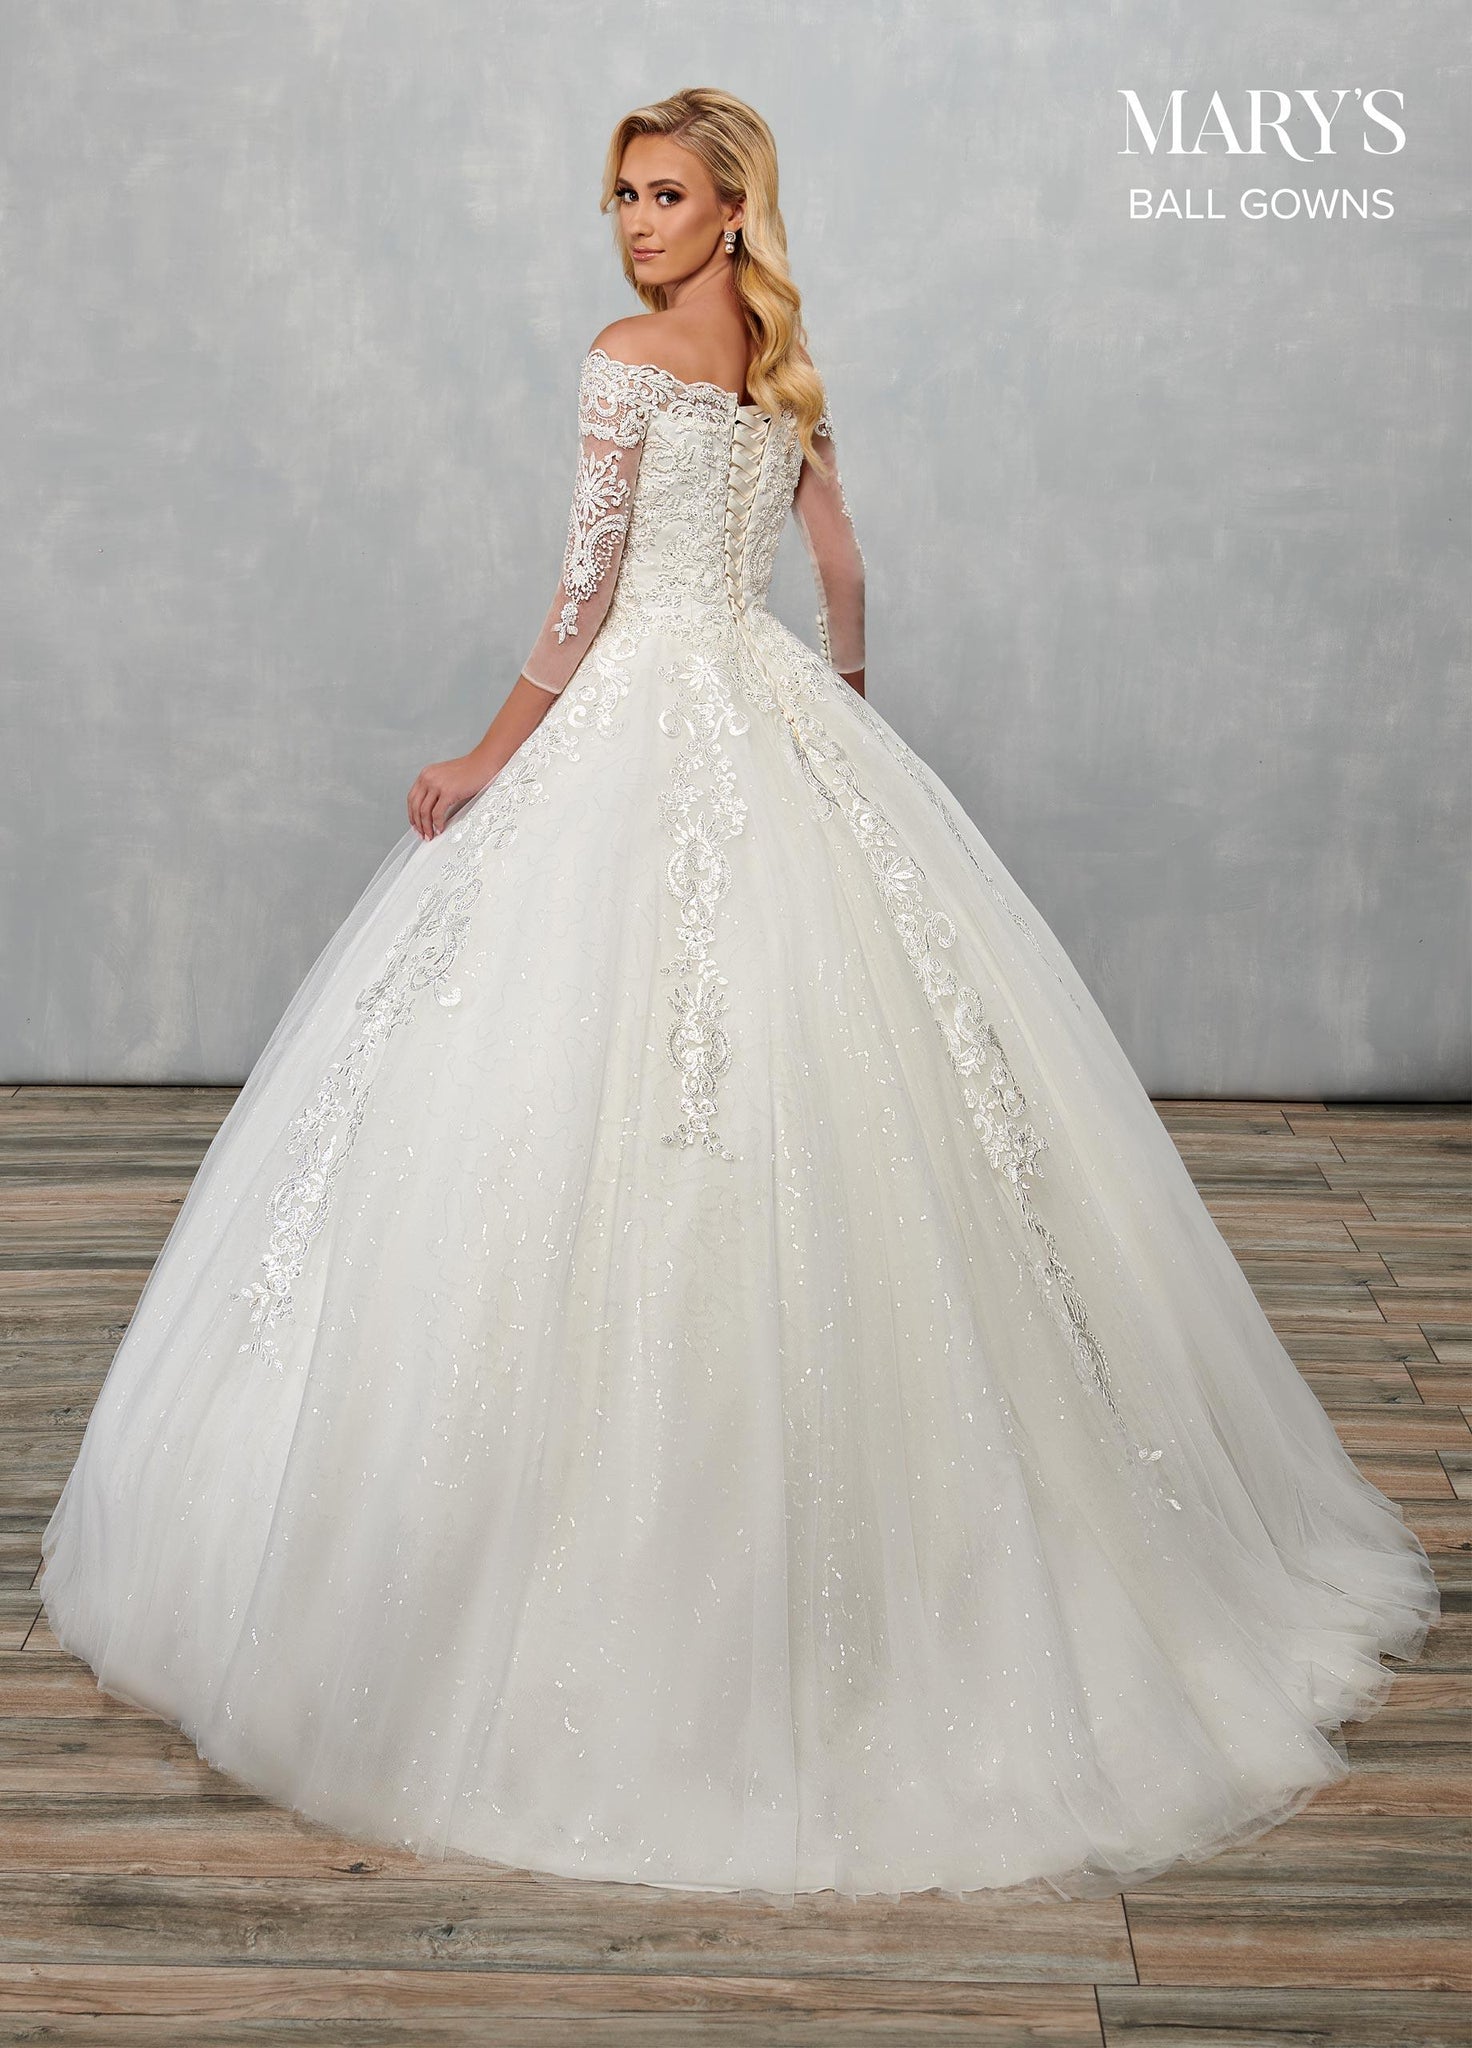 UK20 Leticia - Adore Bridal and Occasion Wear